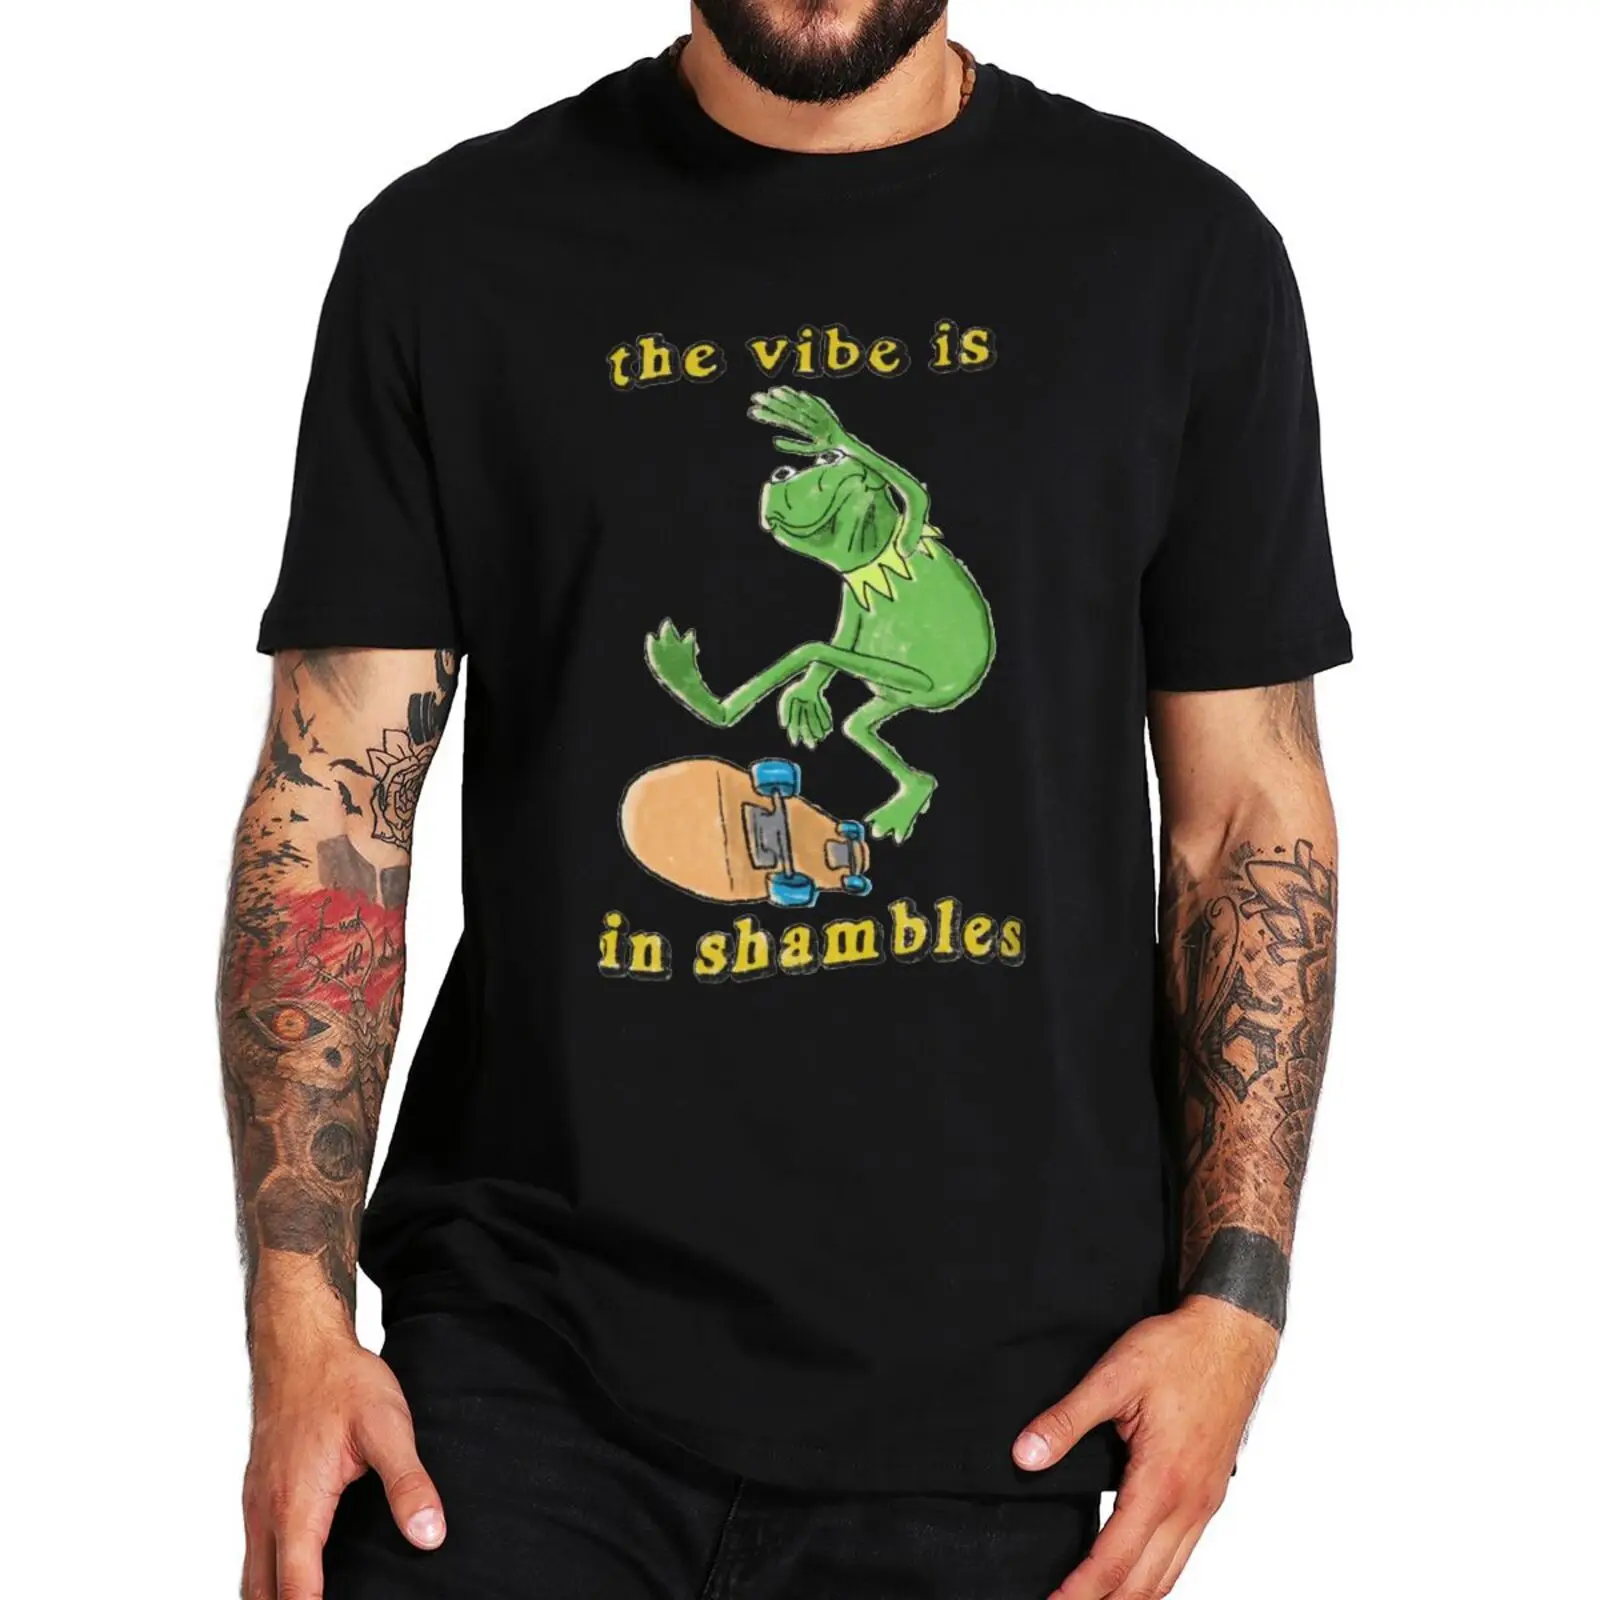 

Vibe In Shambles Short Sleeve T-Shirt The Frog Is On The Skateboard T Shirt 100% Cotton EU Size Tee Tops